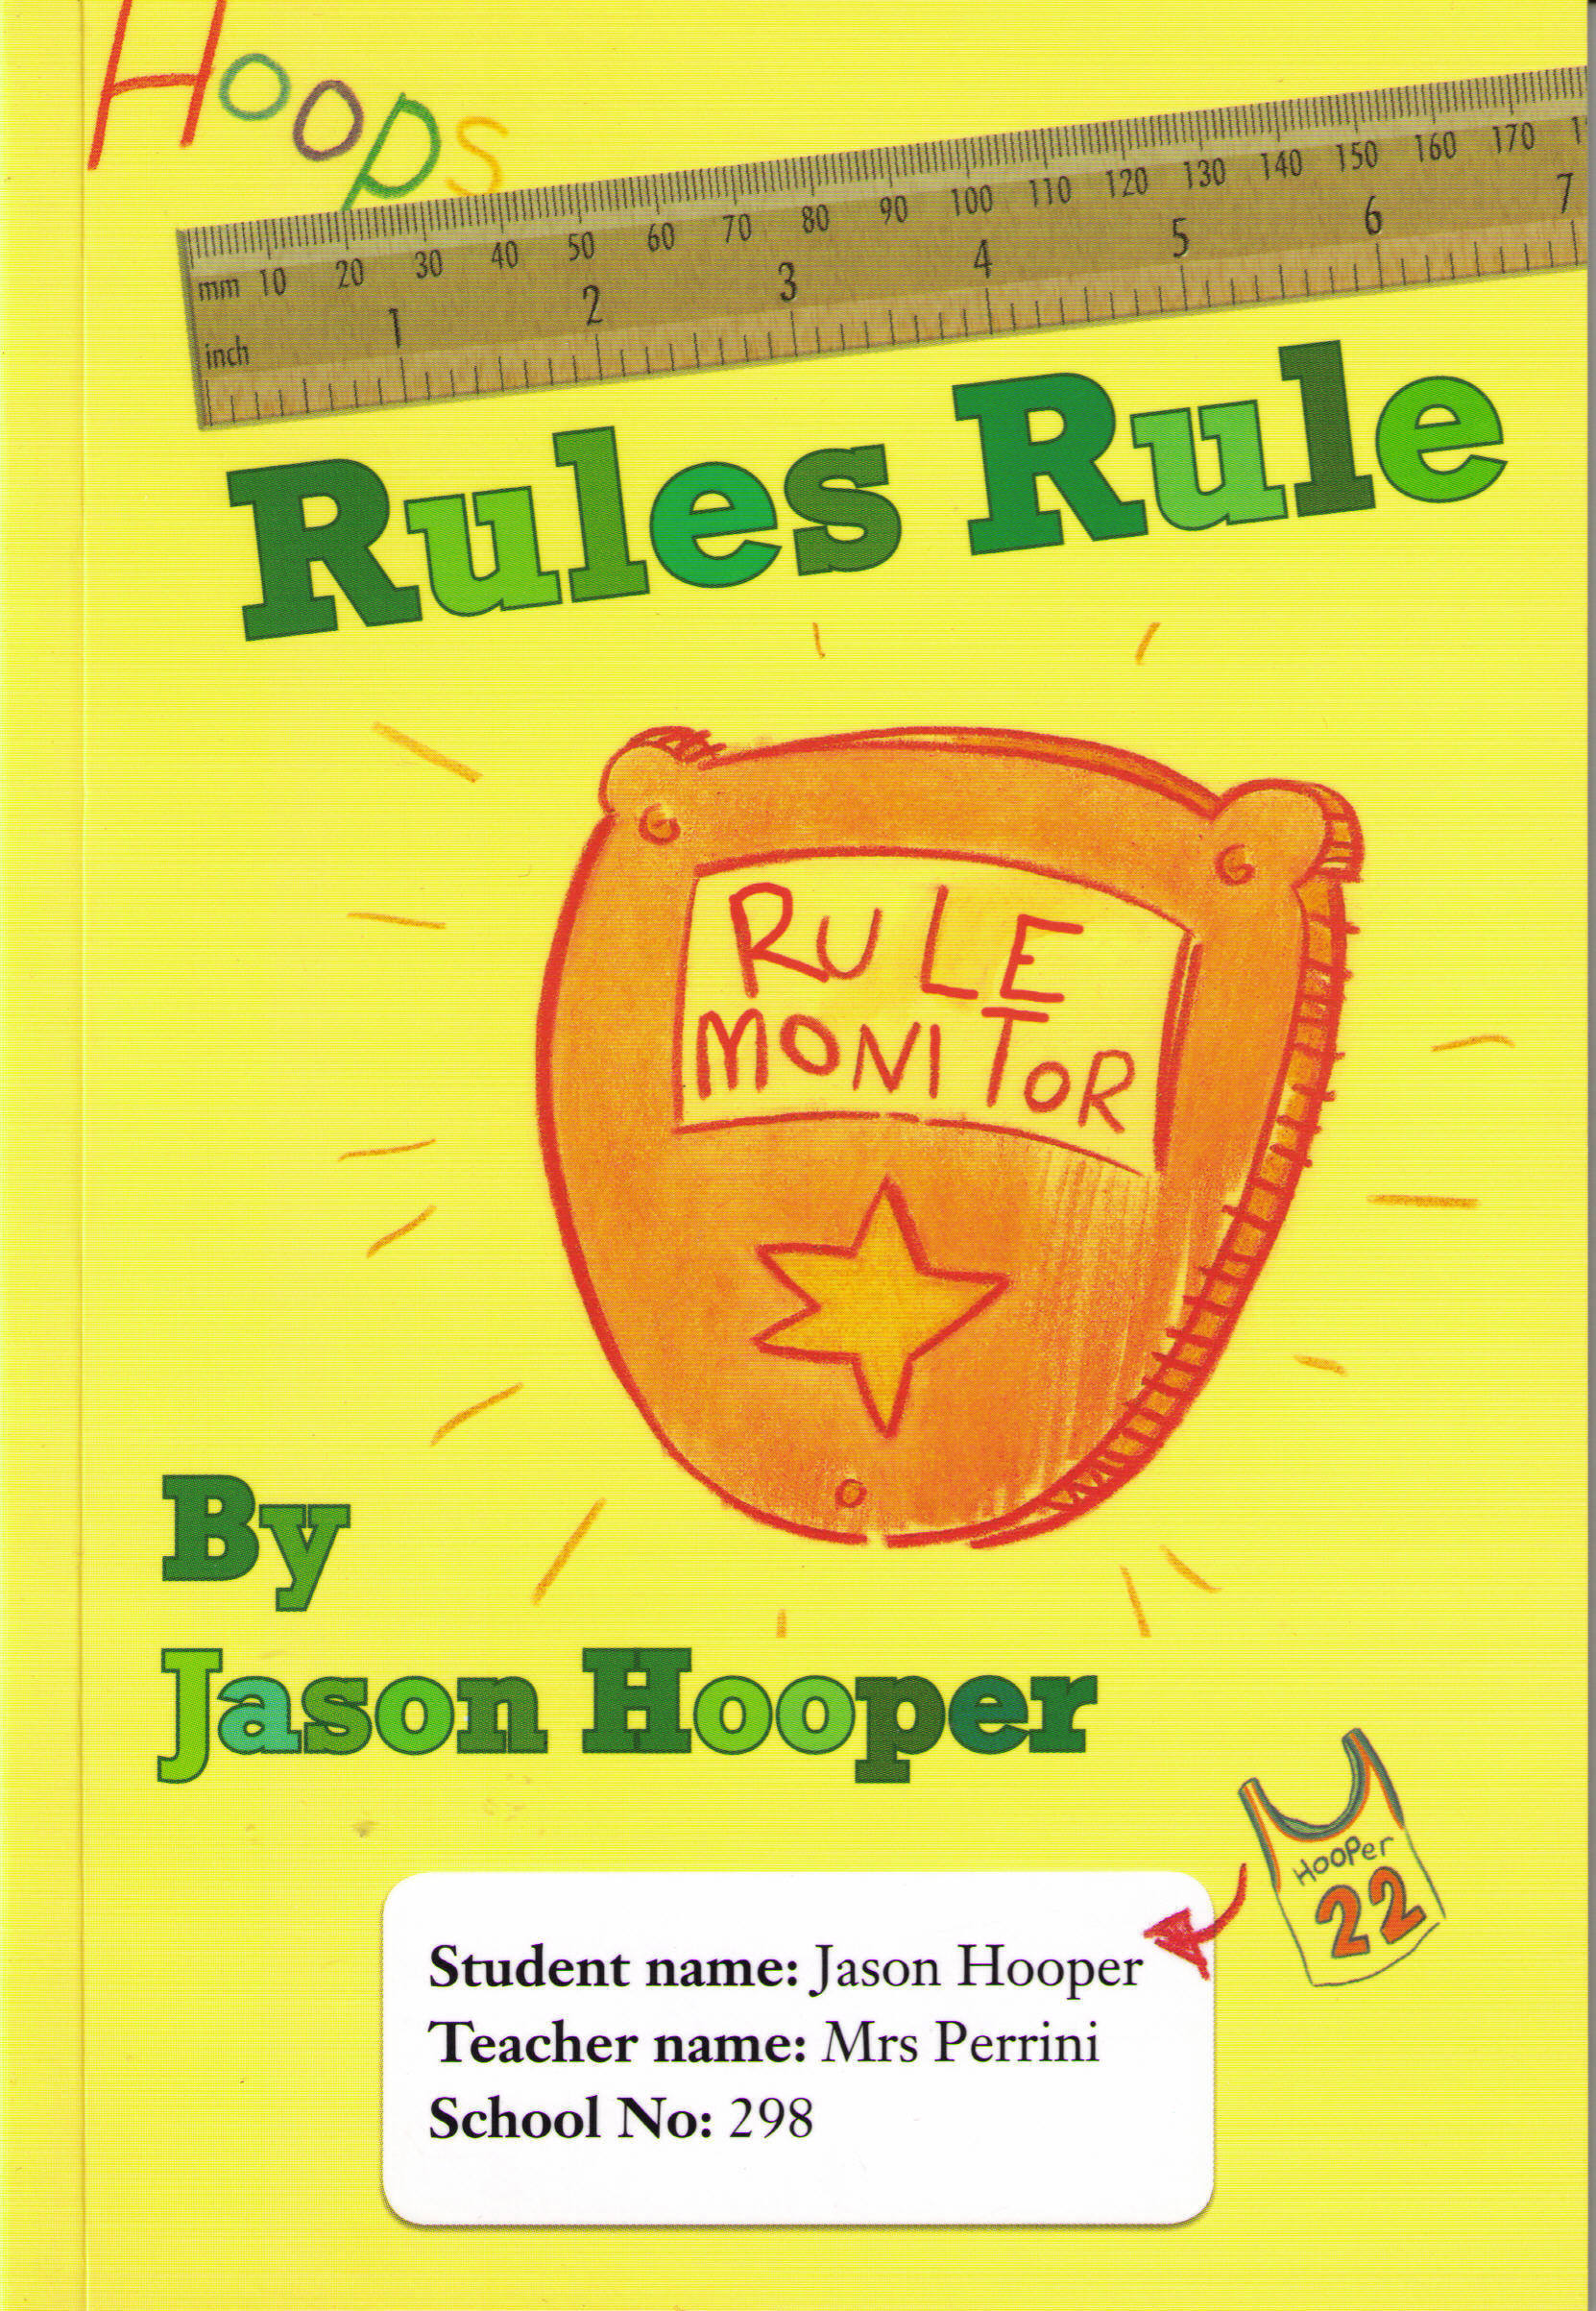 Upholding the rules is not always easy. Meet students from school number 298 as they write their way through the year. From the 298's educational series. Thompson Nelson pubishing.